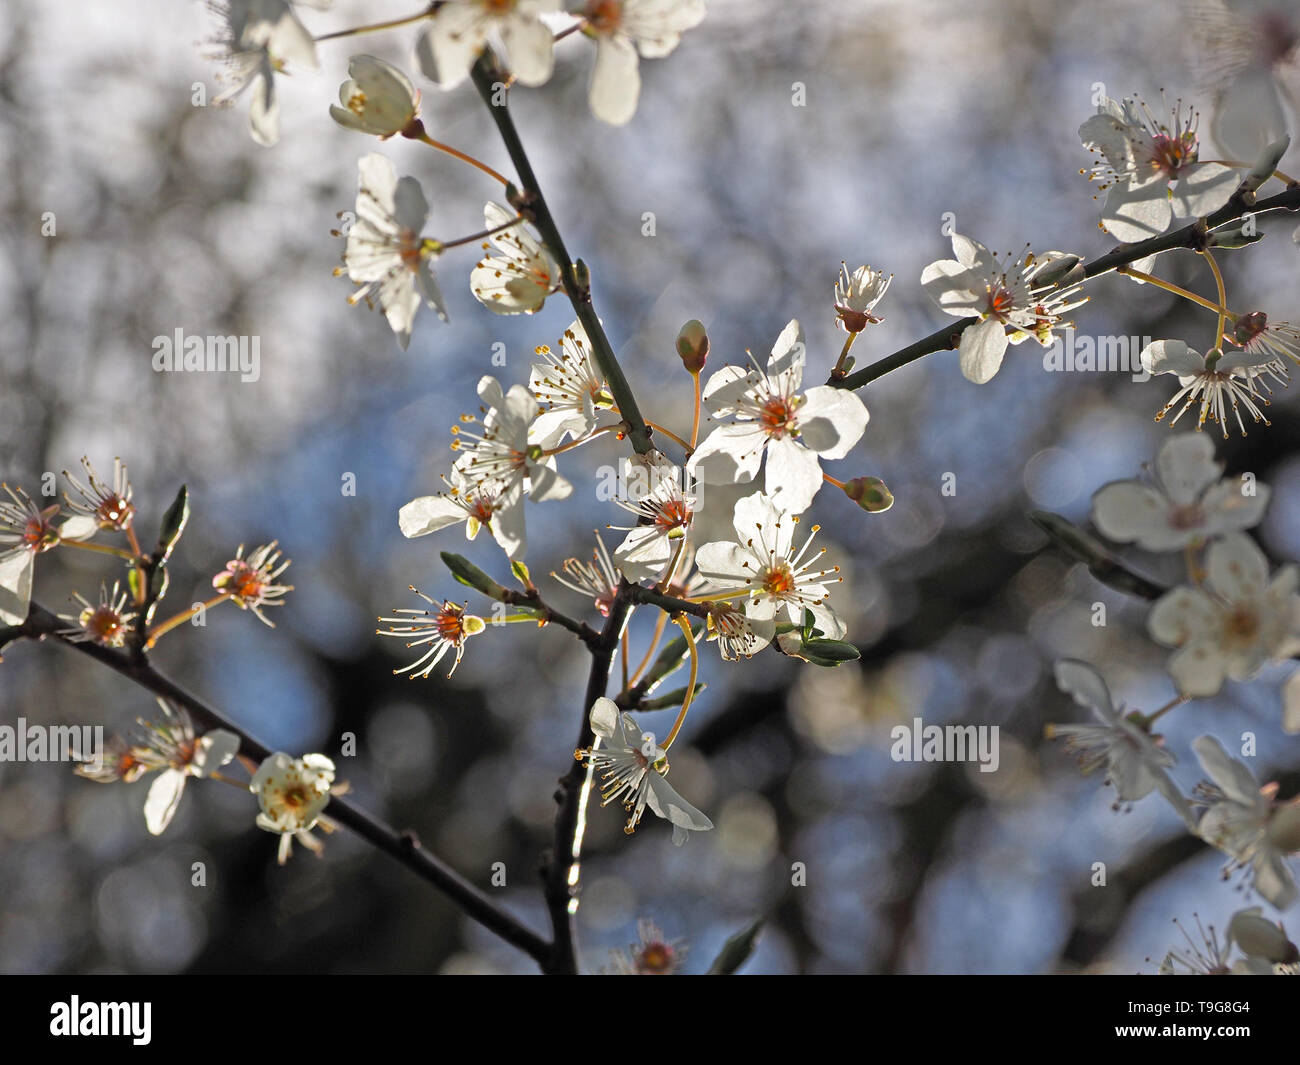 dreamy image of blossom of damson tree (Prunus domestica subsp. insititia) possibly crossed with Sloe/blackthorn (prunus spinosa) - Cumbria,England UK Stock Photo